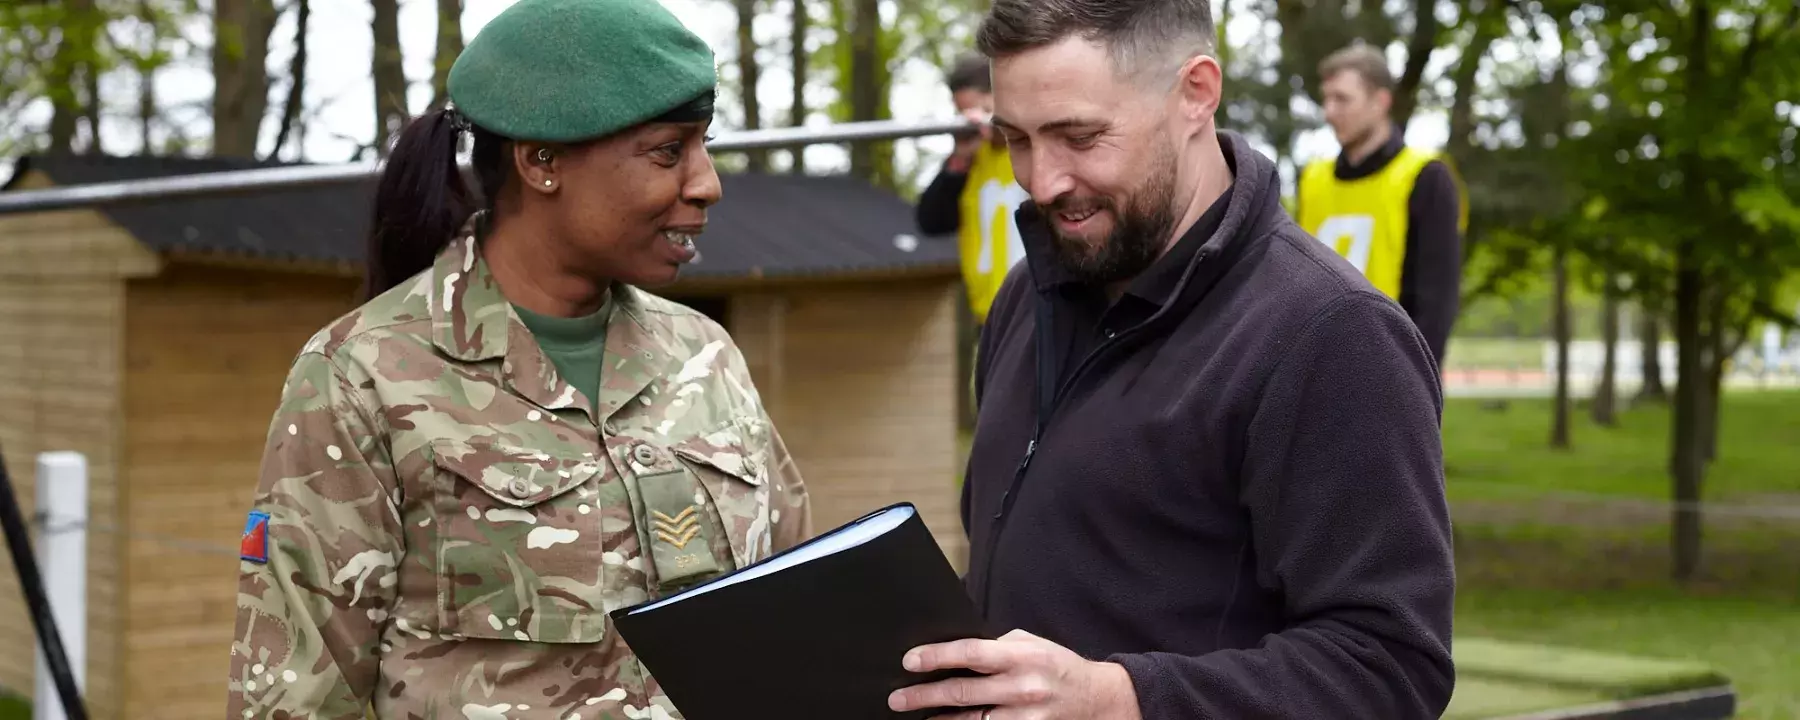 Careers at Capita – defence, learning and resilience careers